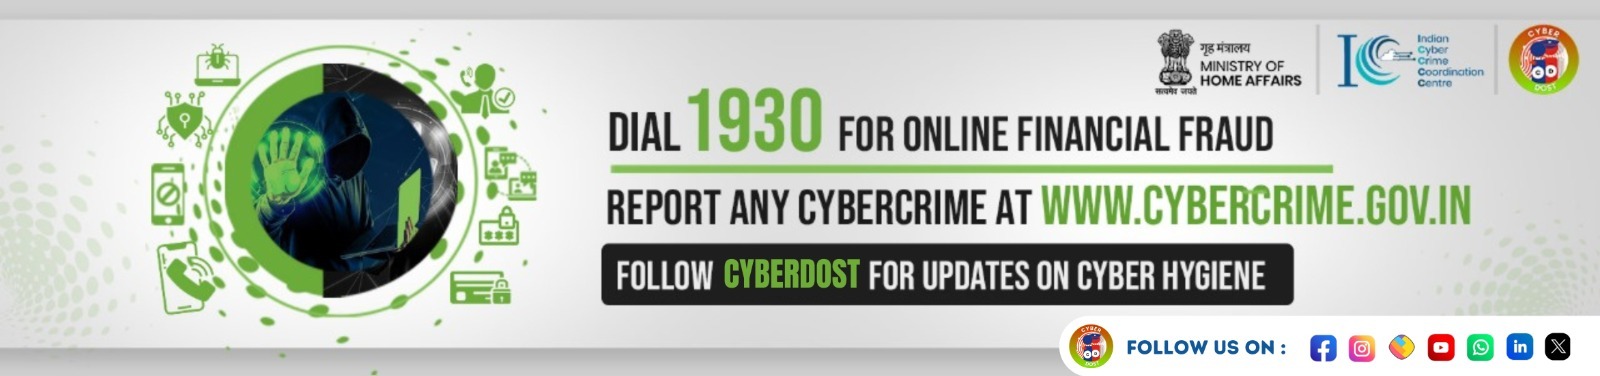 Dial 1930 for online financial fraud report any cybercrime at www.cybercrime.gov.in